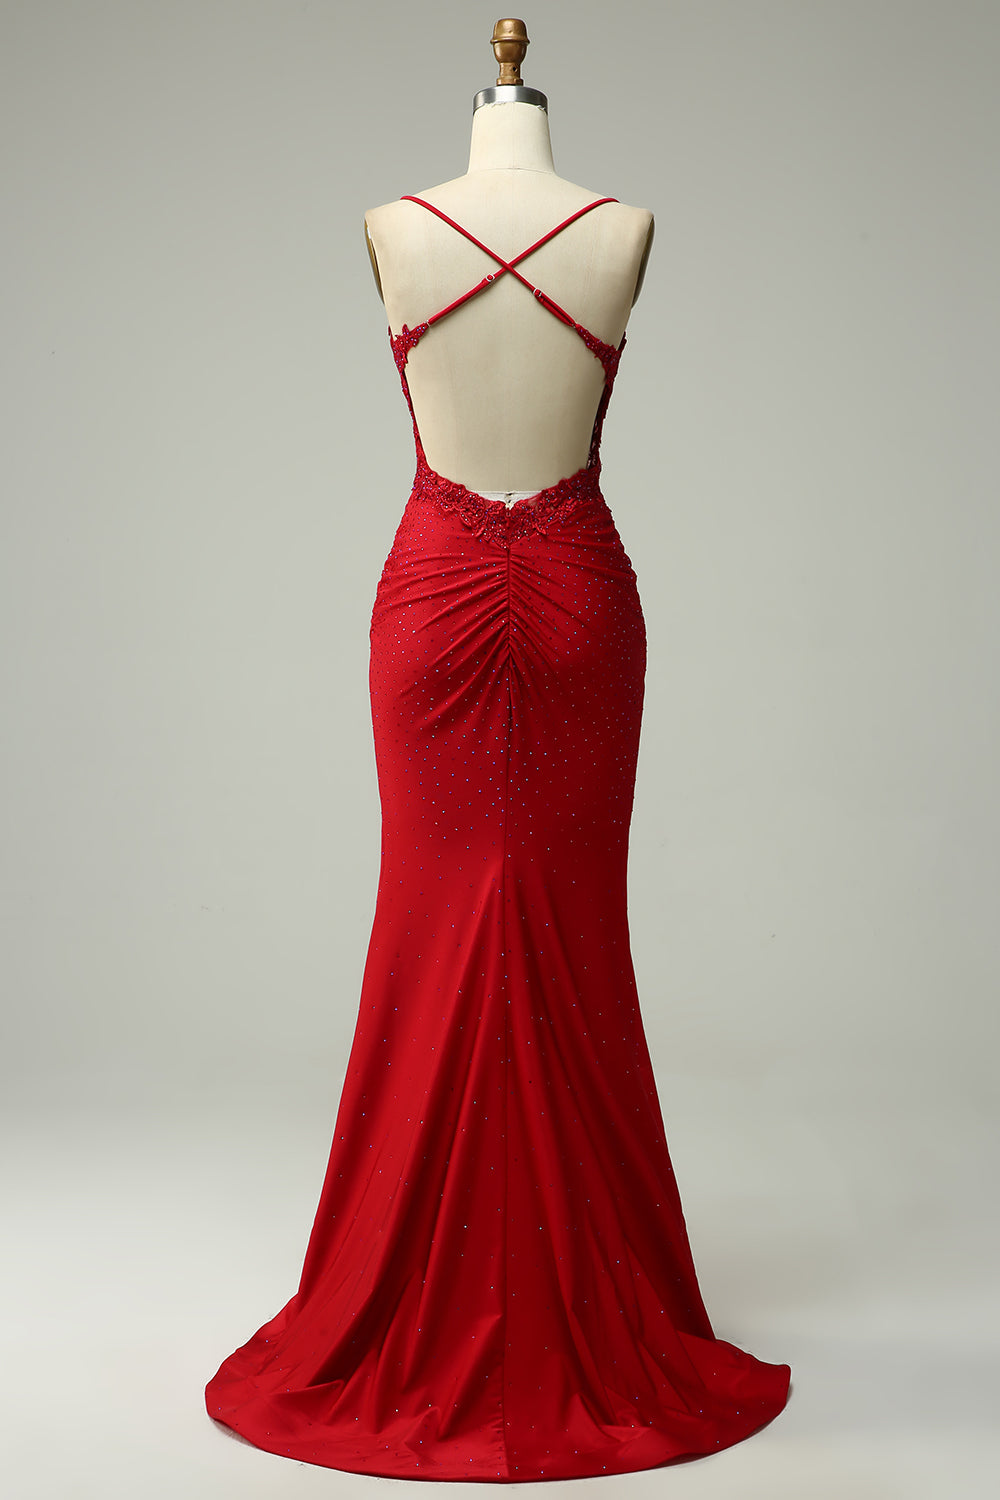 Vampal Red Halter Neck Sleeveless Beaded Two Piece Prom Dress with Split